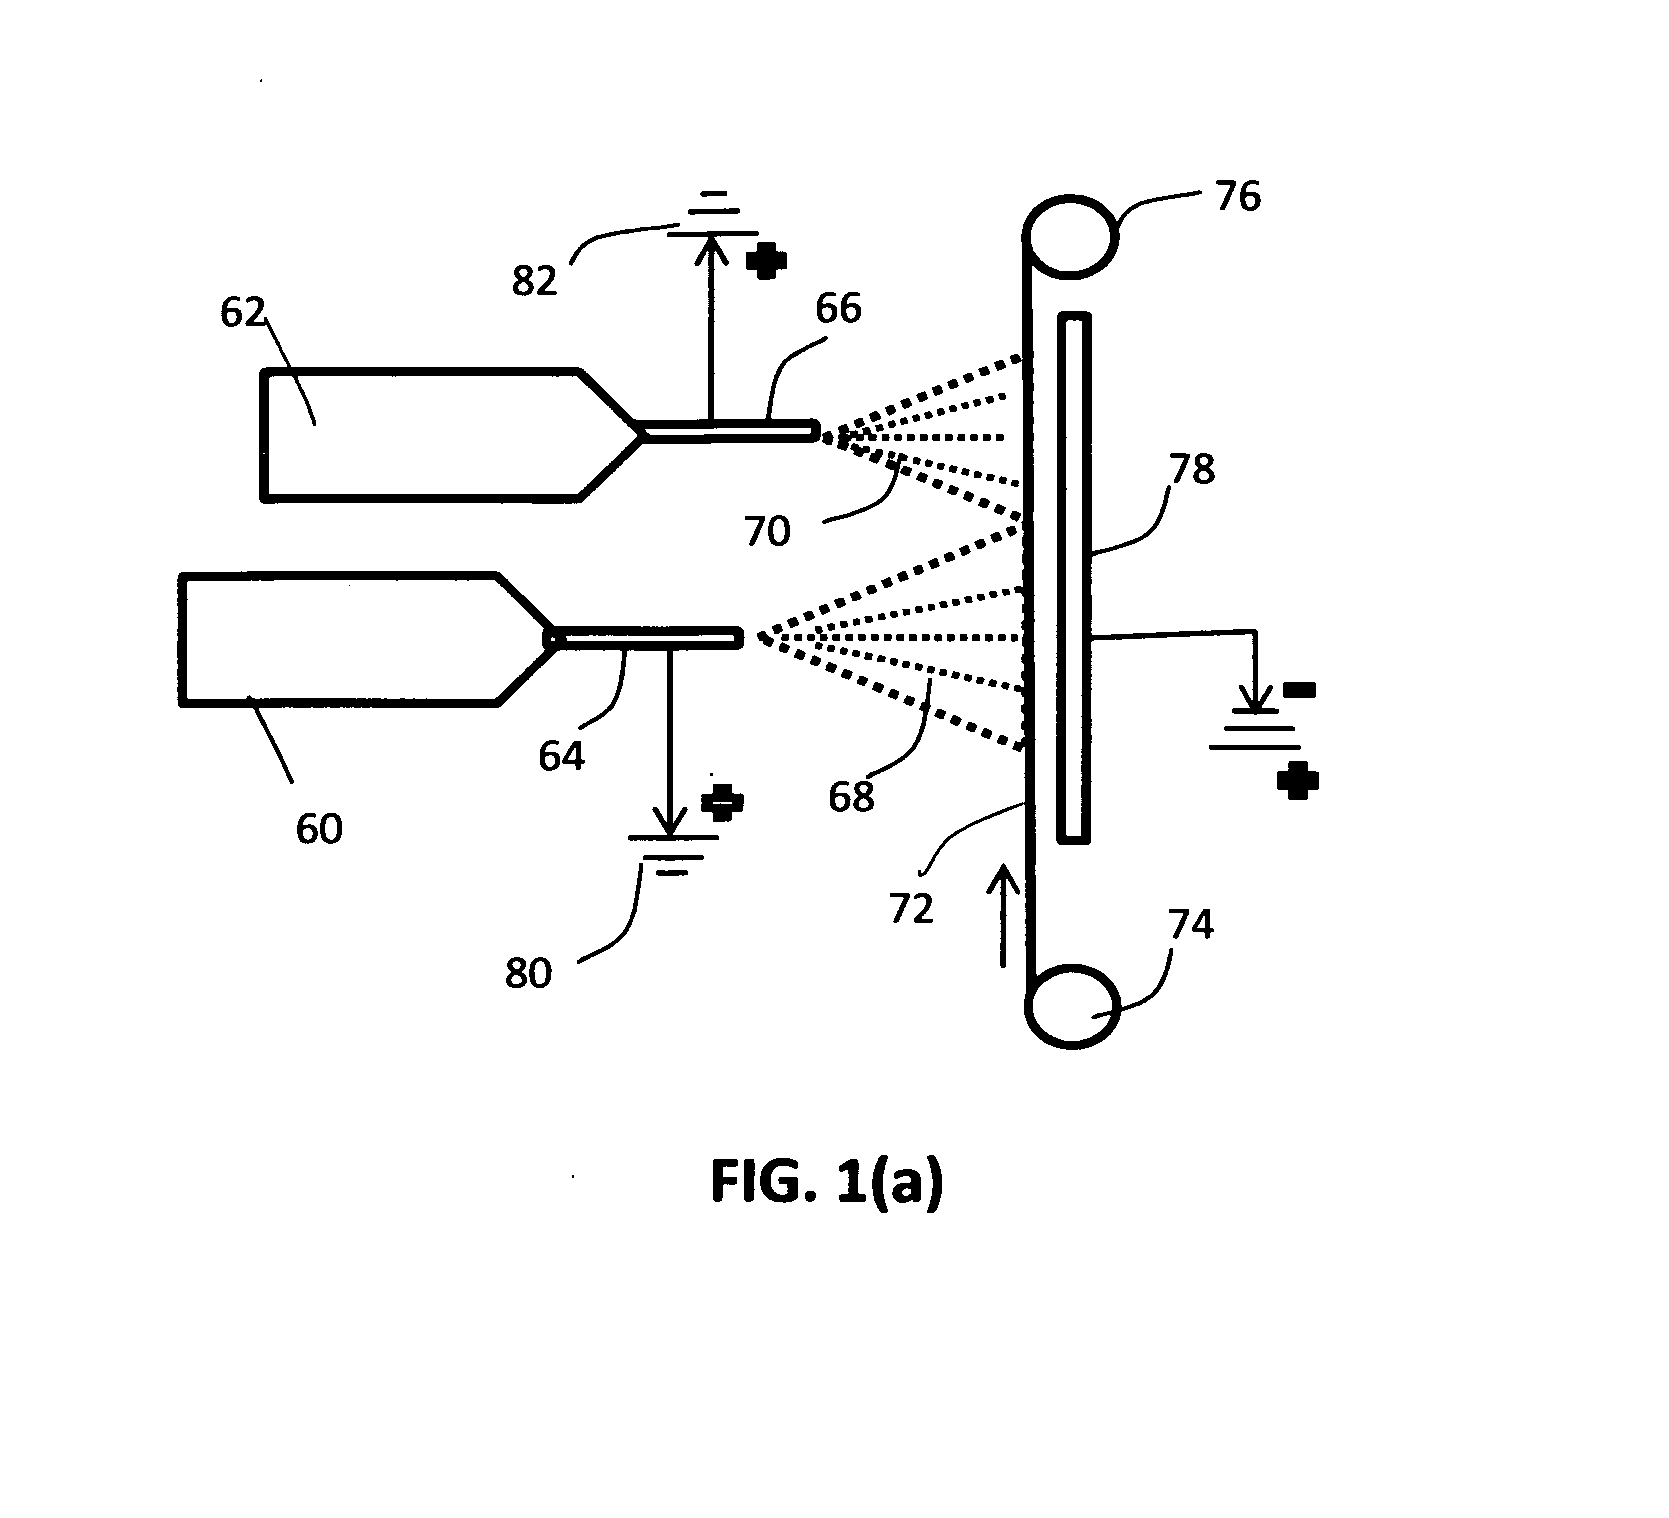 Method for producing conducting and transparent films from combined graphene and conductive nano filaments